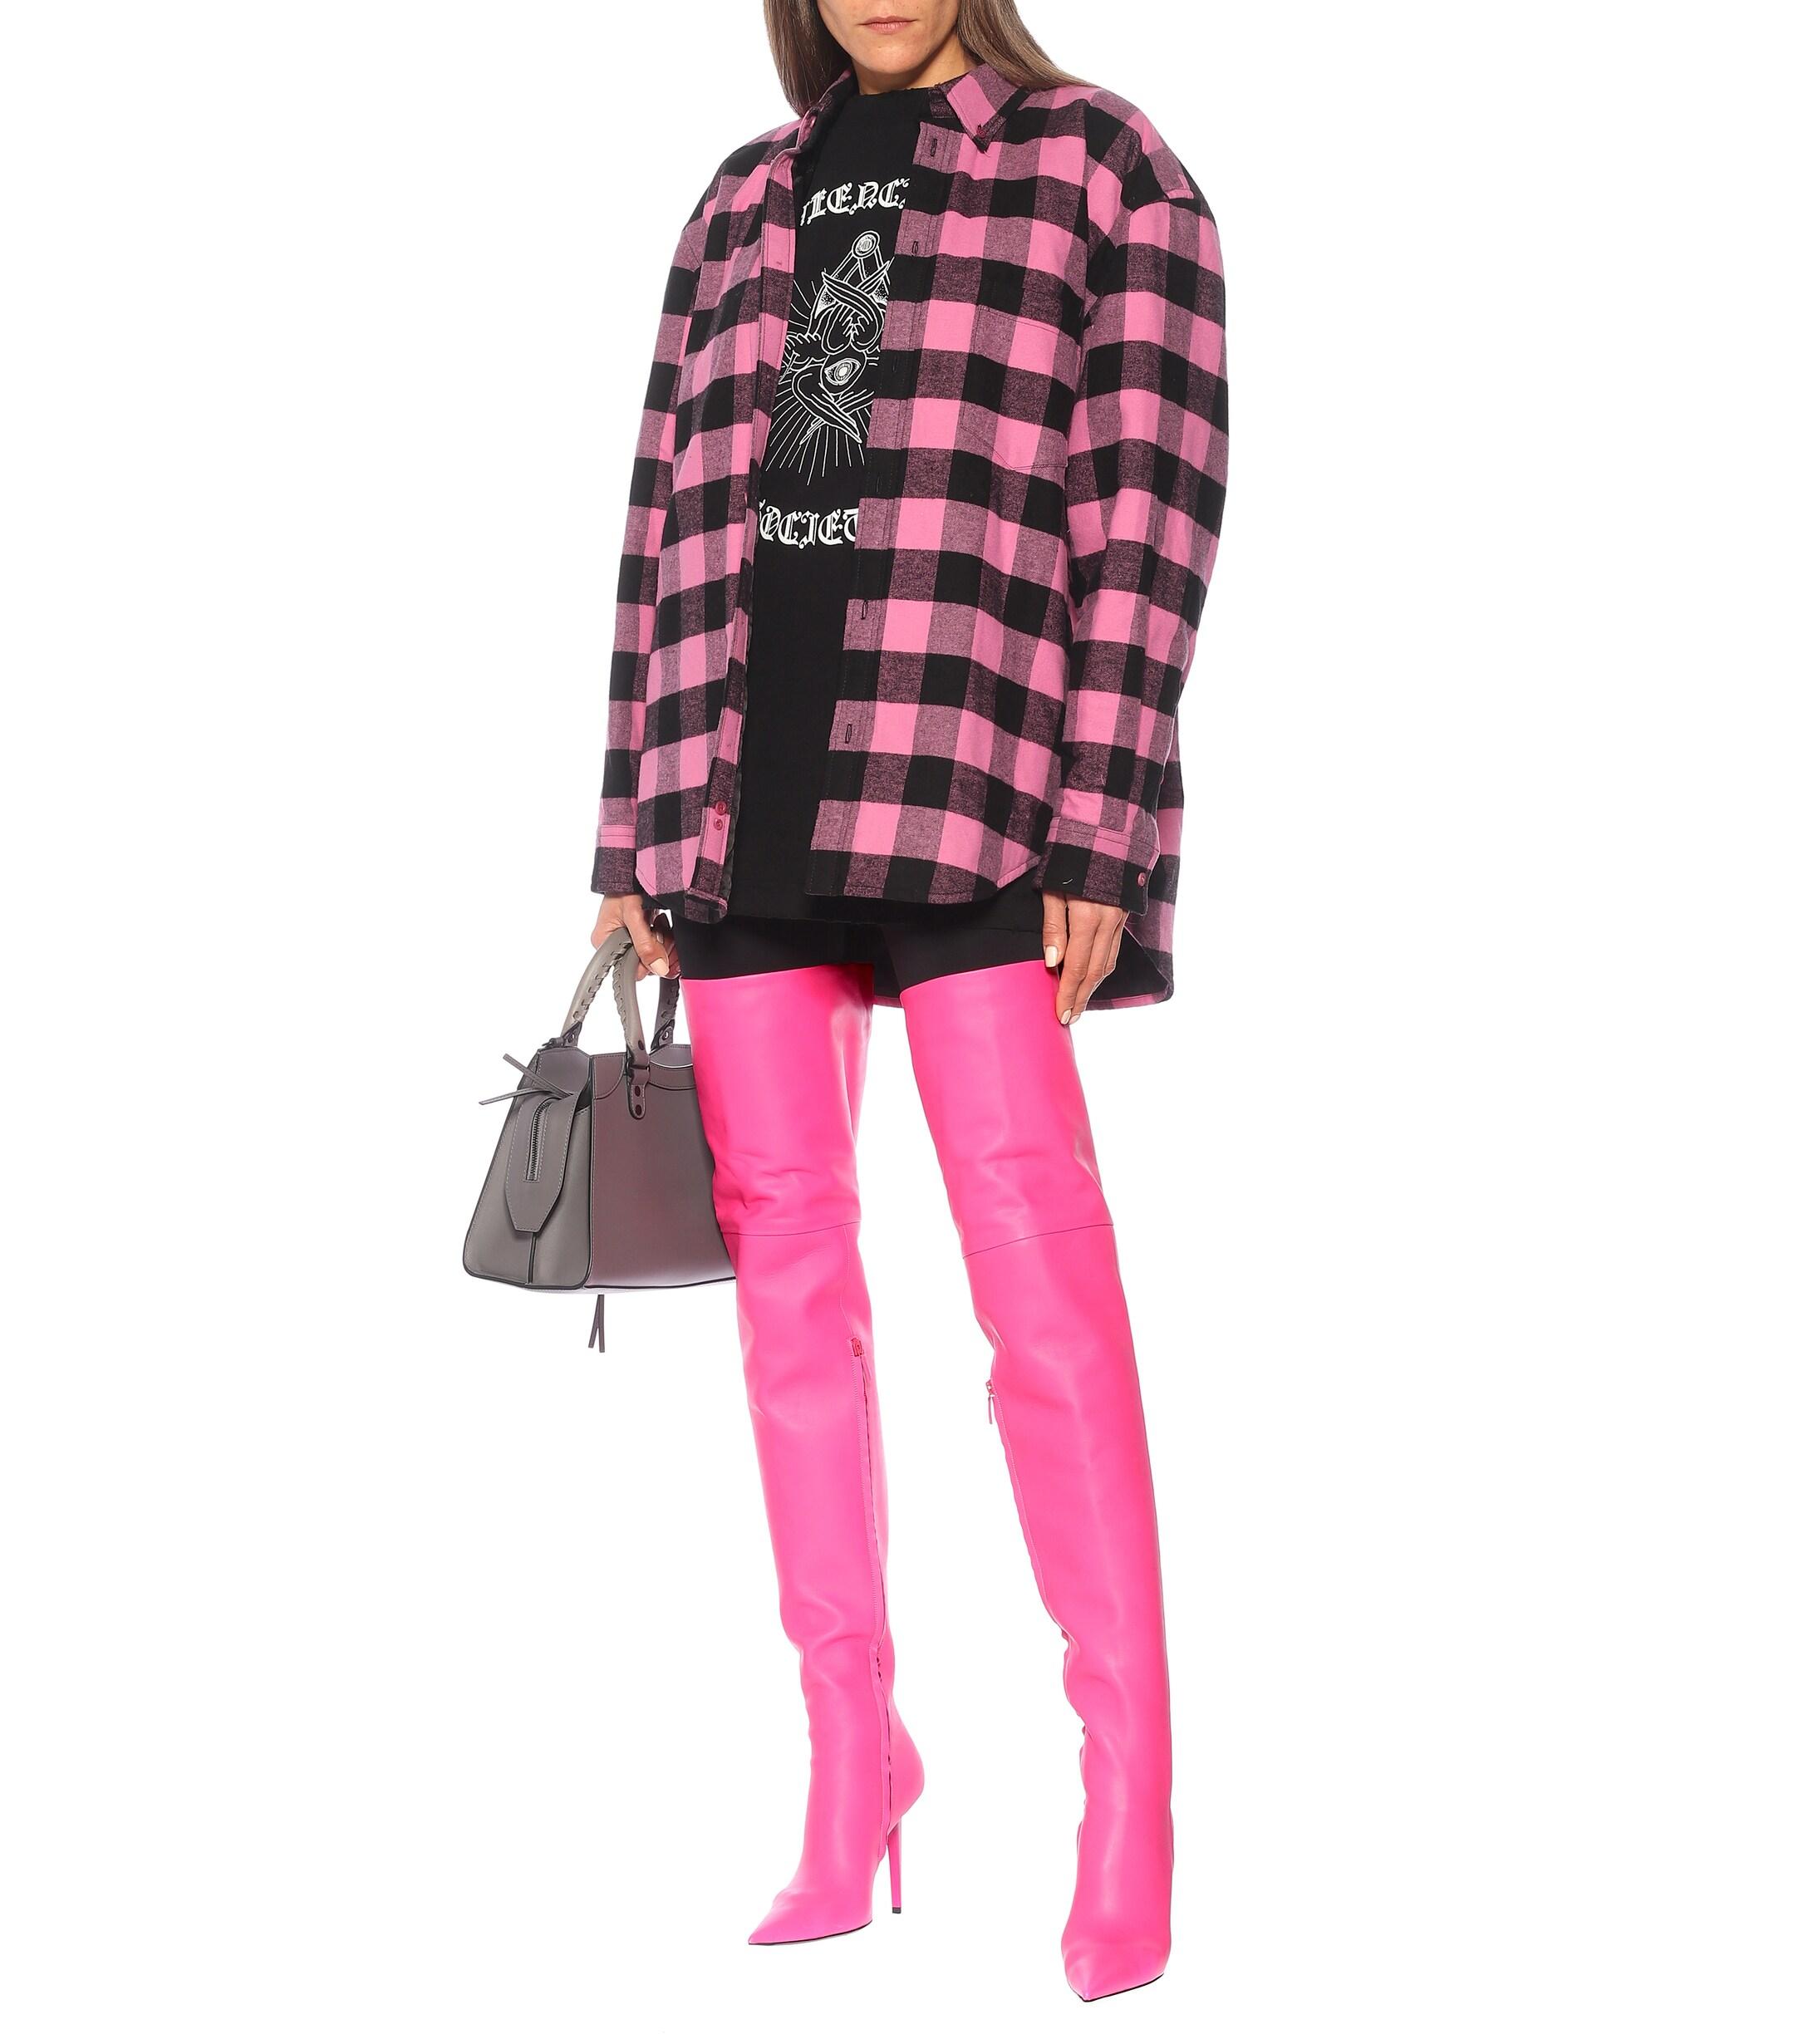 Balenciaga Knife Shark Leather Over-the-knee Boots in Pink | Lyst